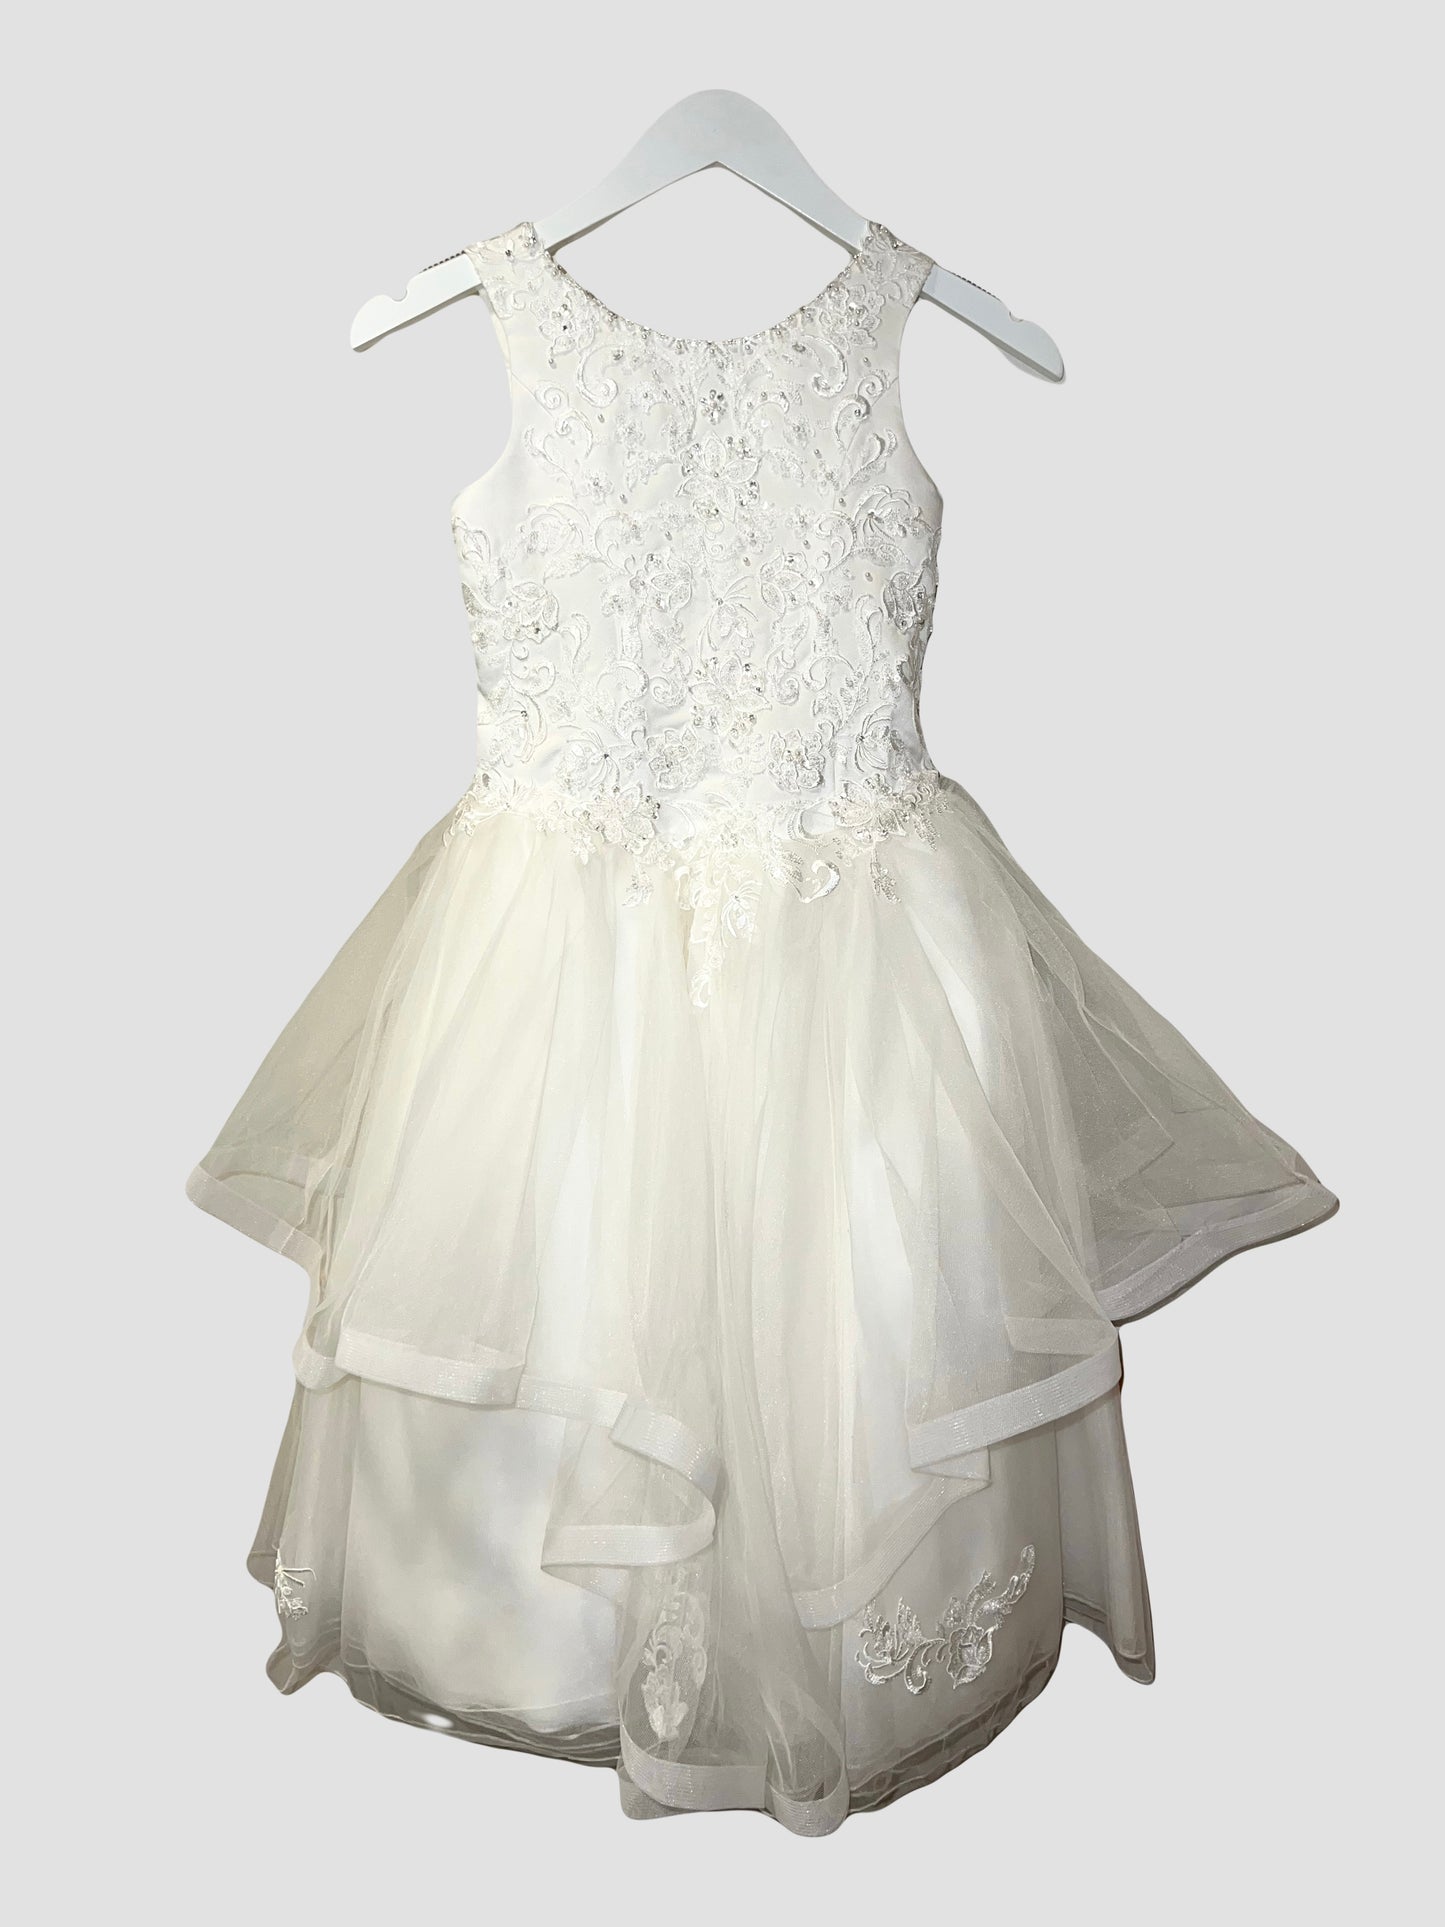 Ruffled Tulle Skirt with Lace & Beading Detail Dress